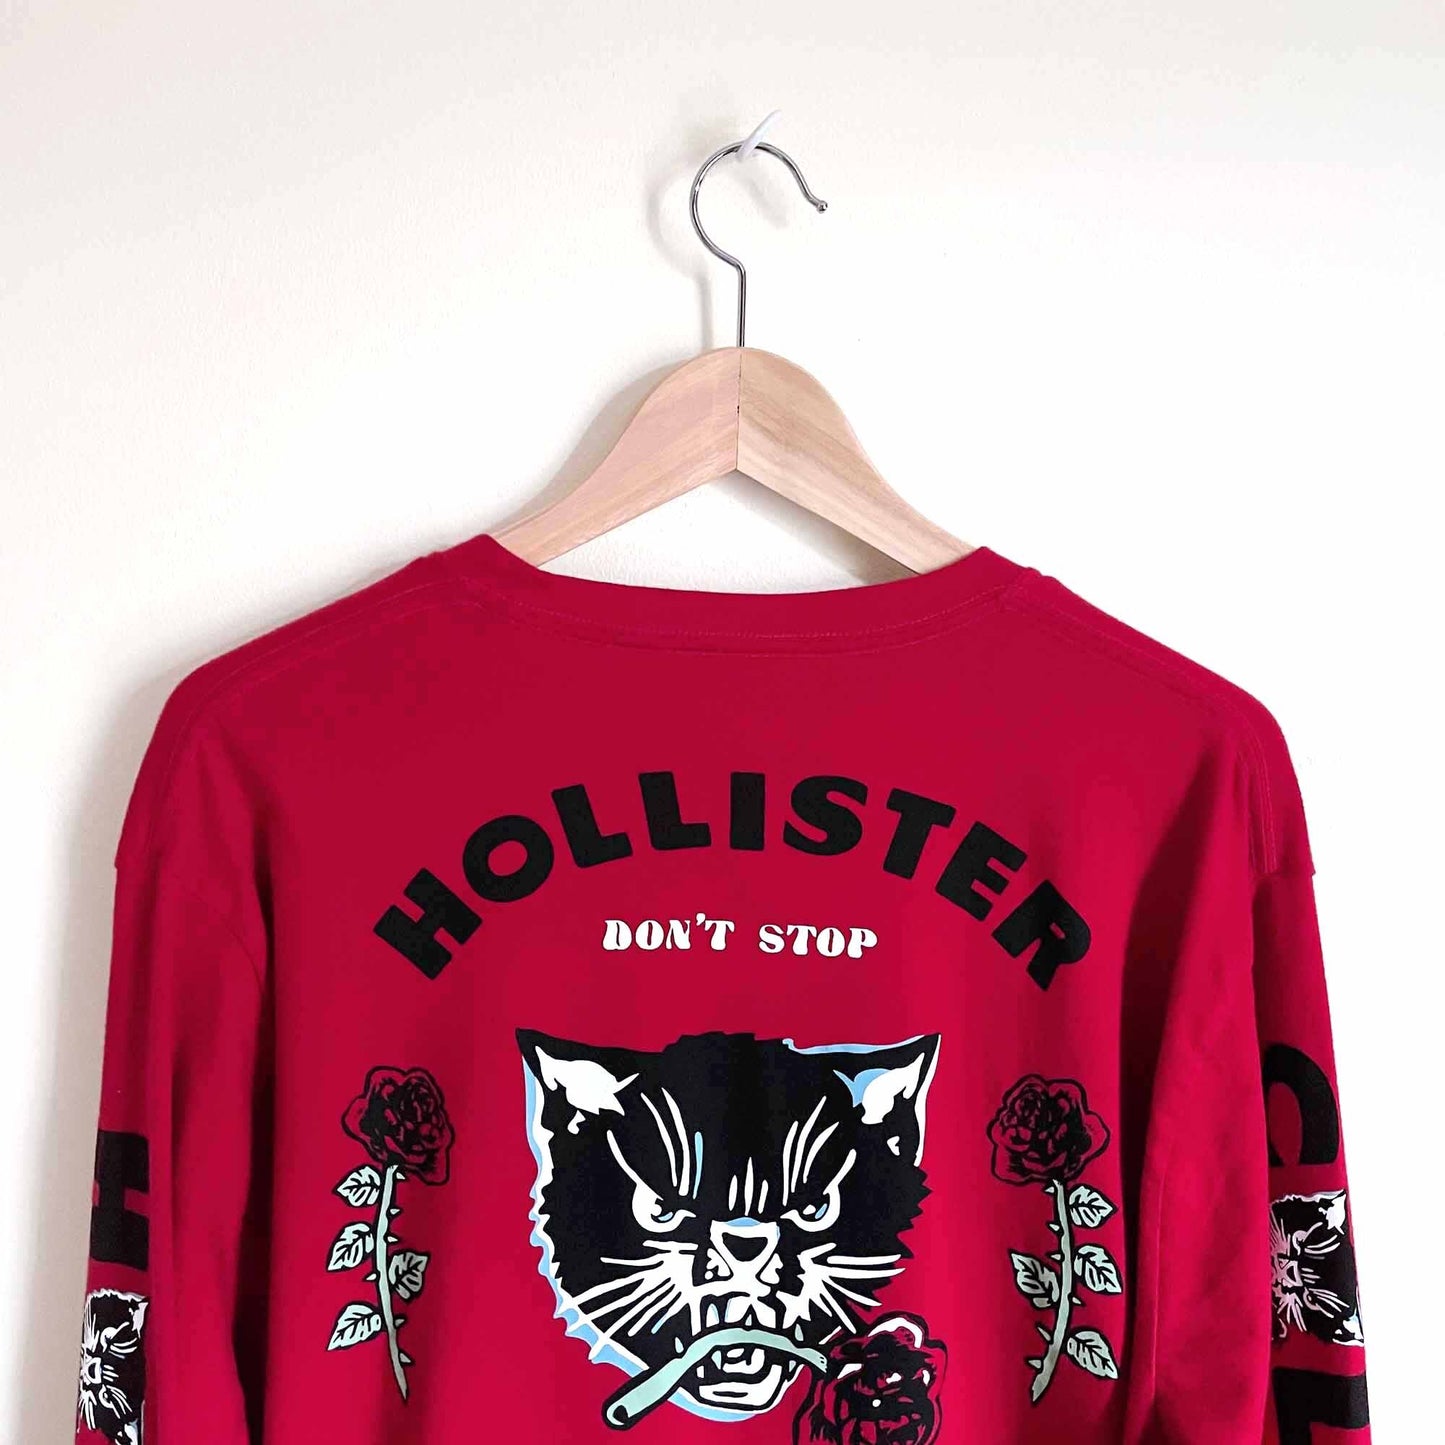 hollister don't stop the youth long sleeve tee - size large